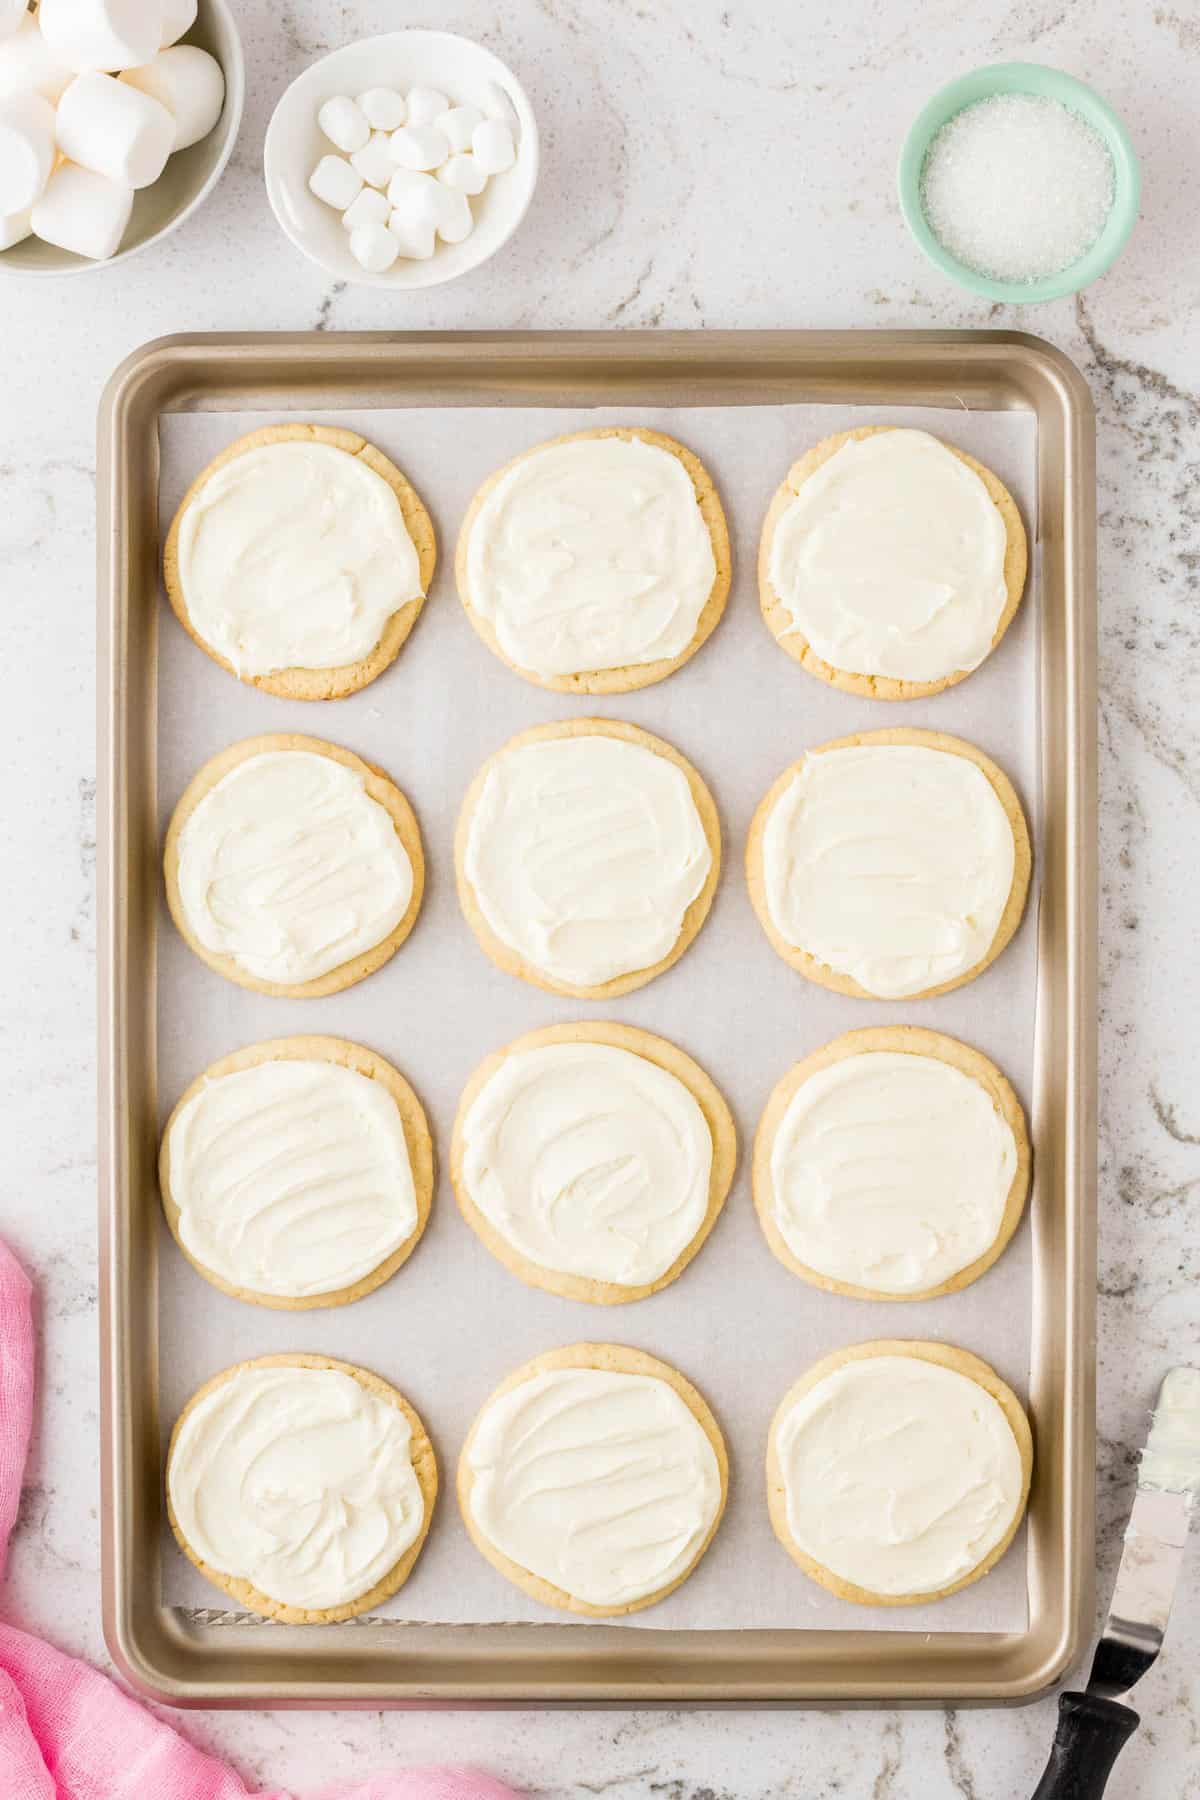 Once cookies are cooled, spread white frosting on top.